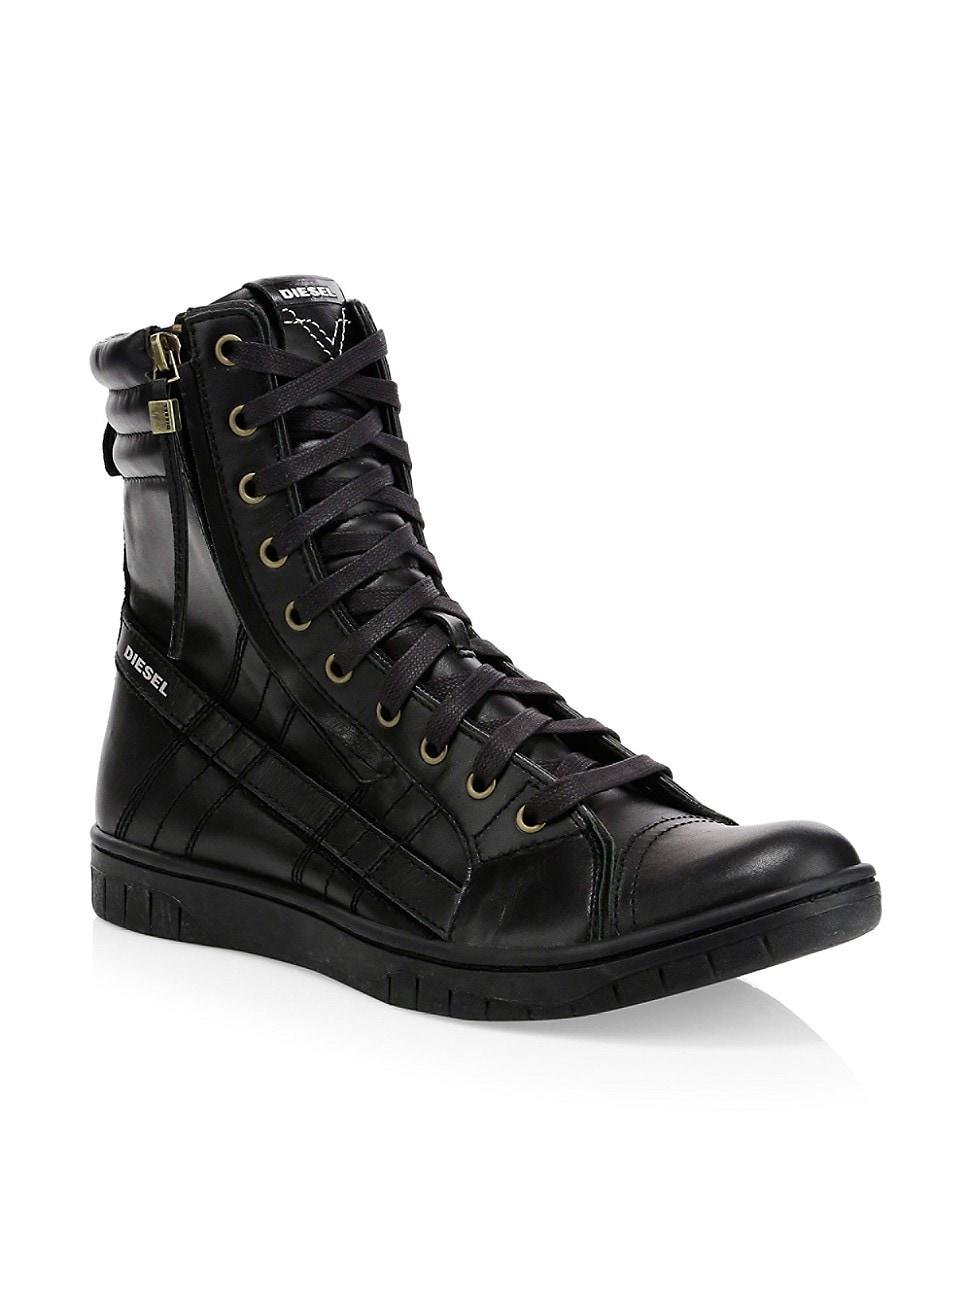 DIESEL Leather Sneaker Boots in Black for | Lyst